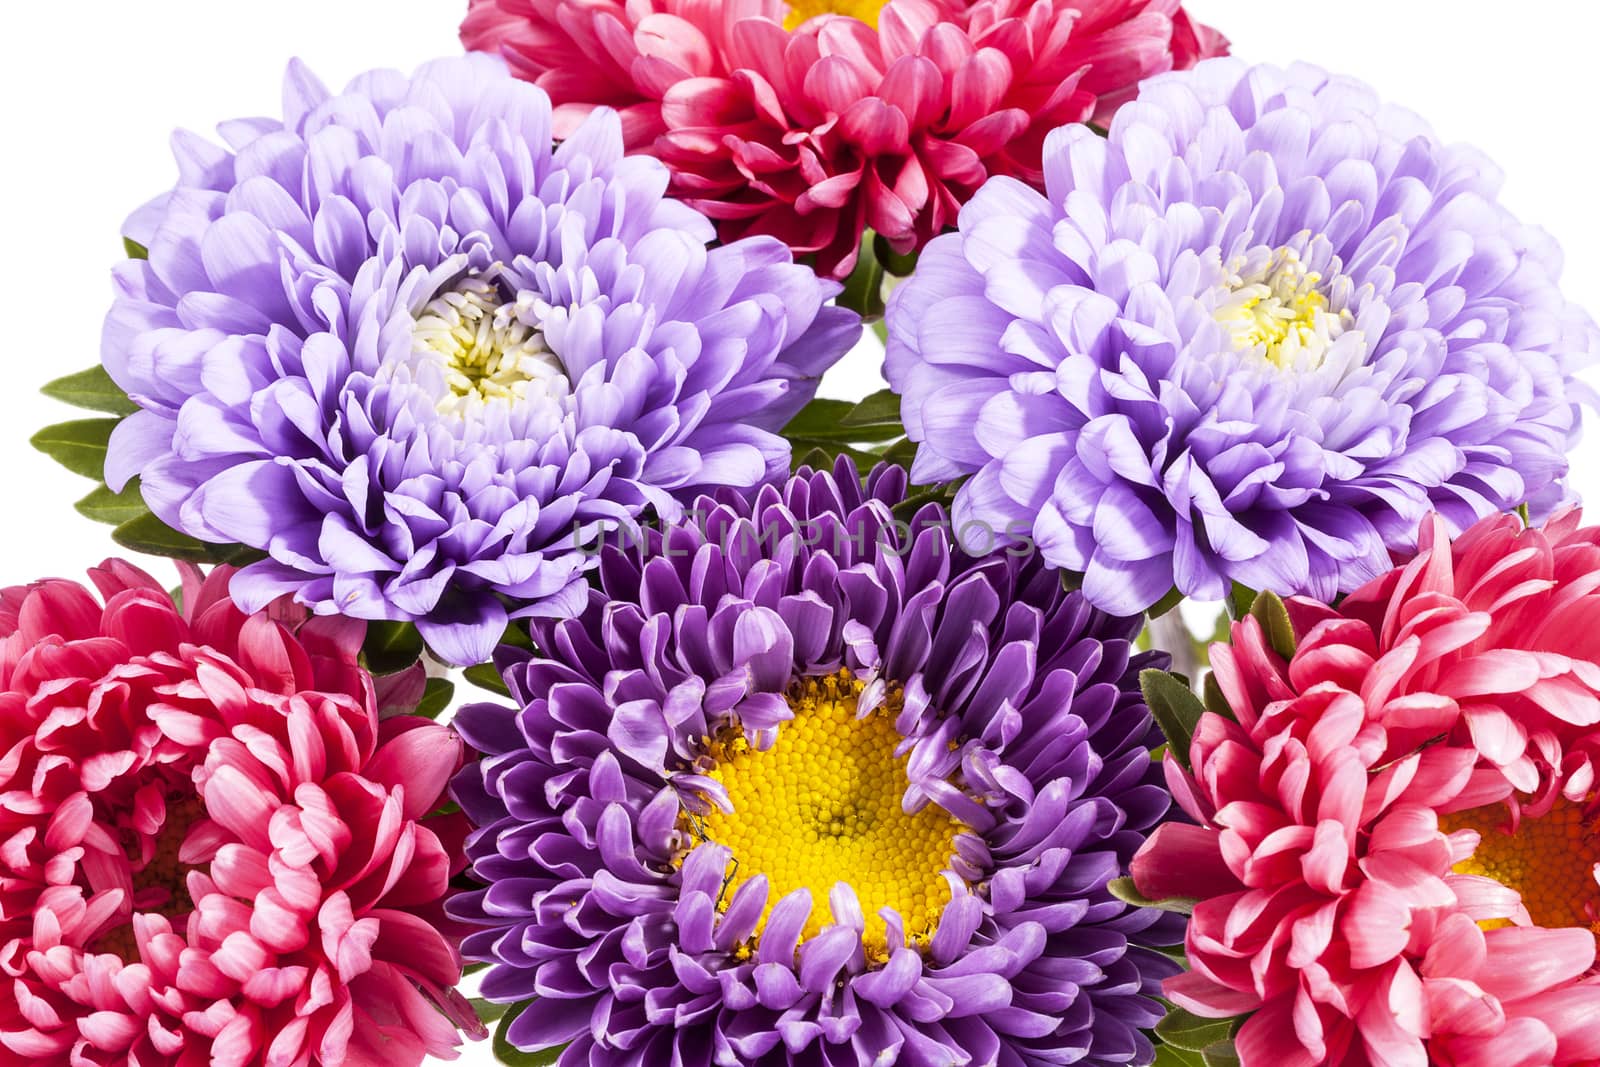 
Bouquet of colorful aster flowers, close up 
